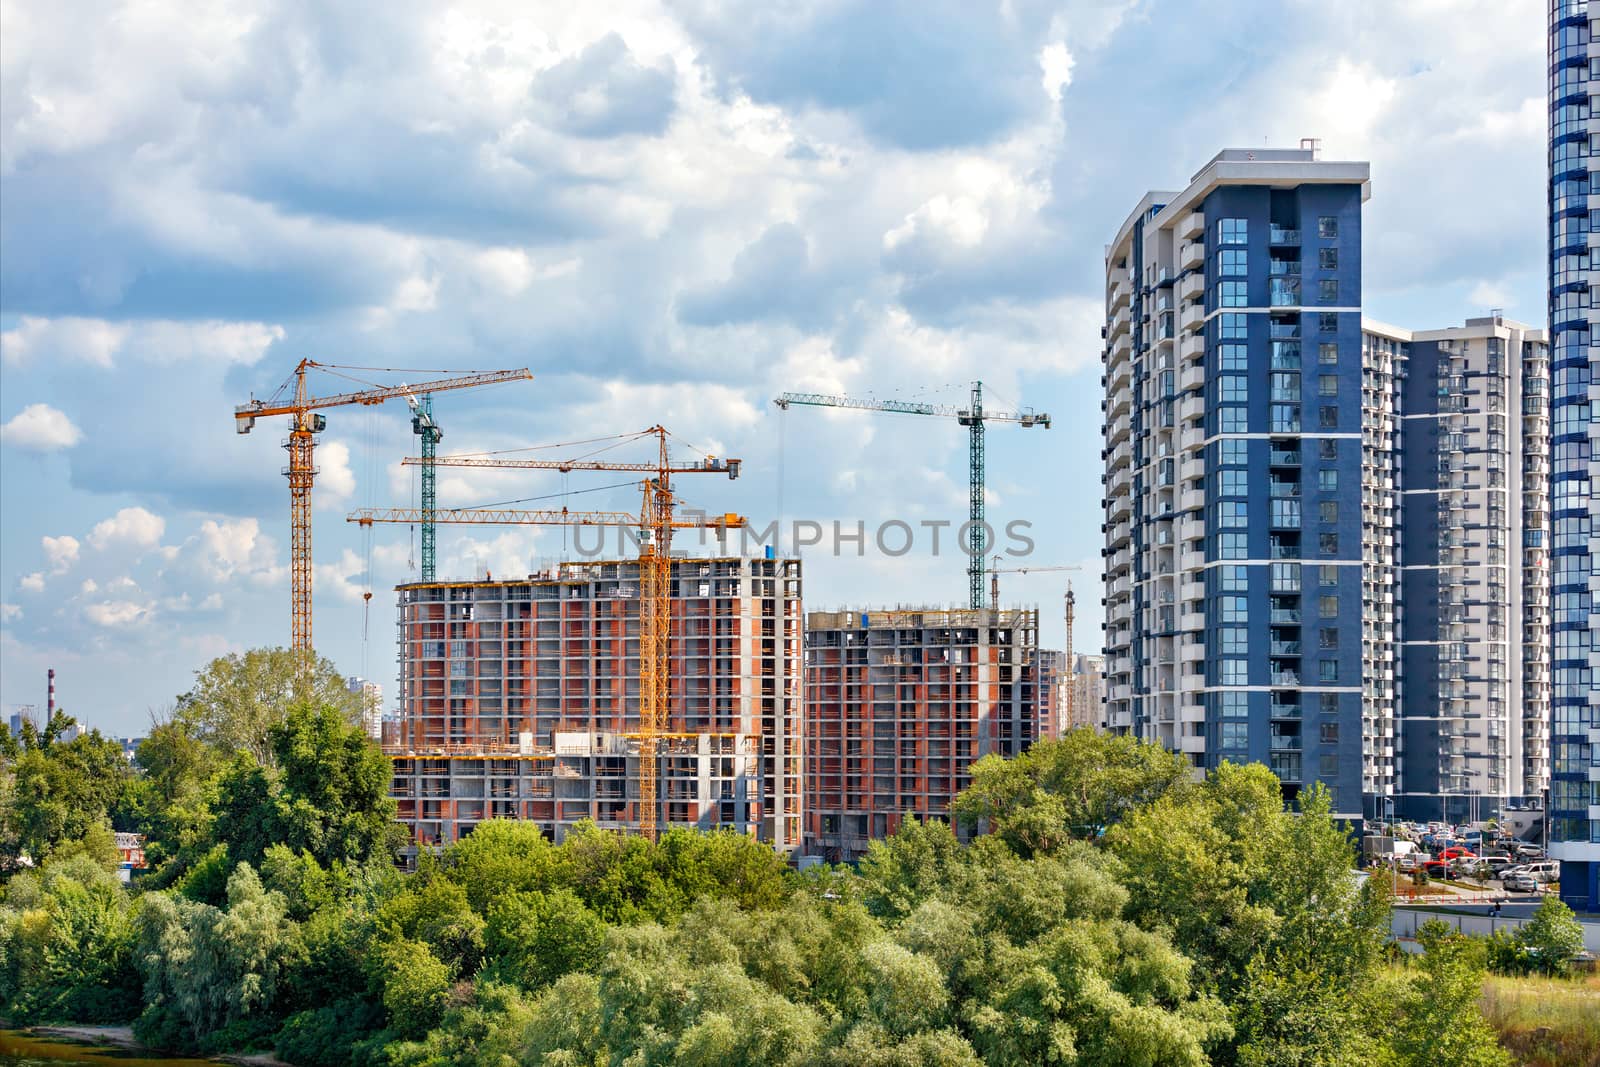 Construction site of a multi-storey residential complex on the river bank against the background of coastal trees, cloudy sky and facades of new buildings, copy space.